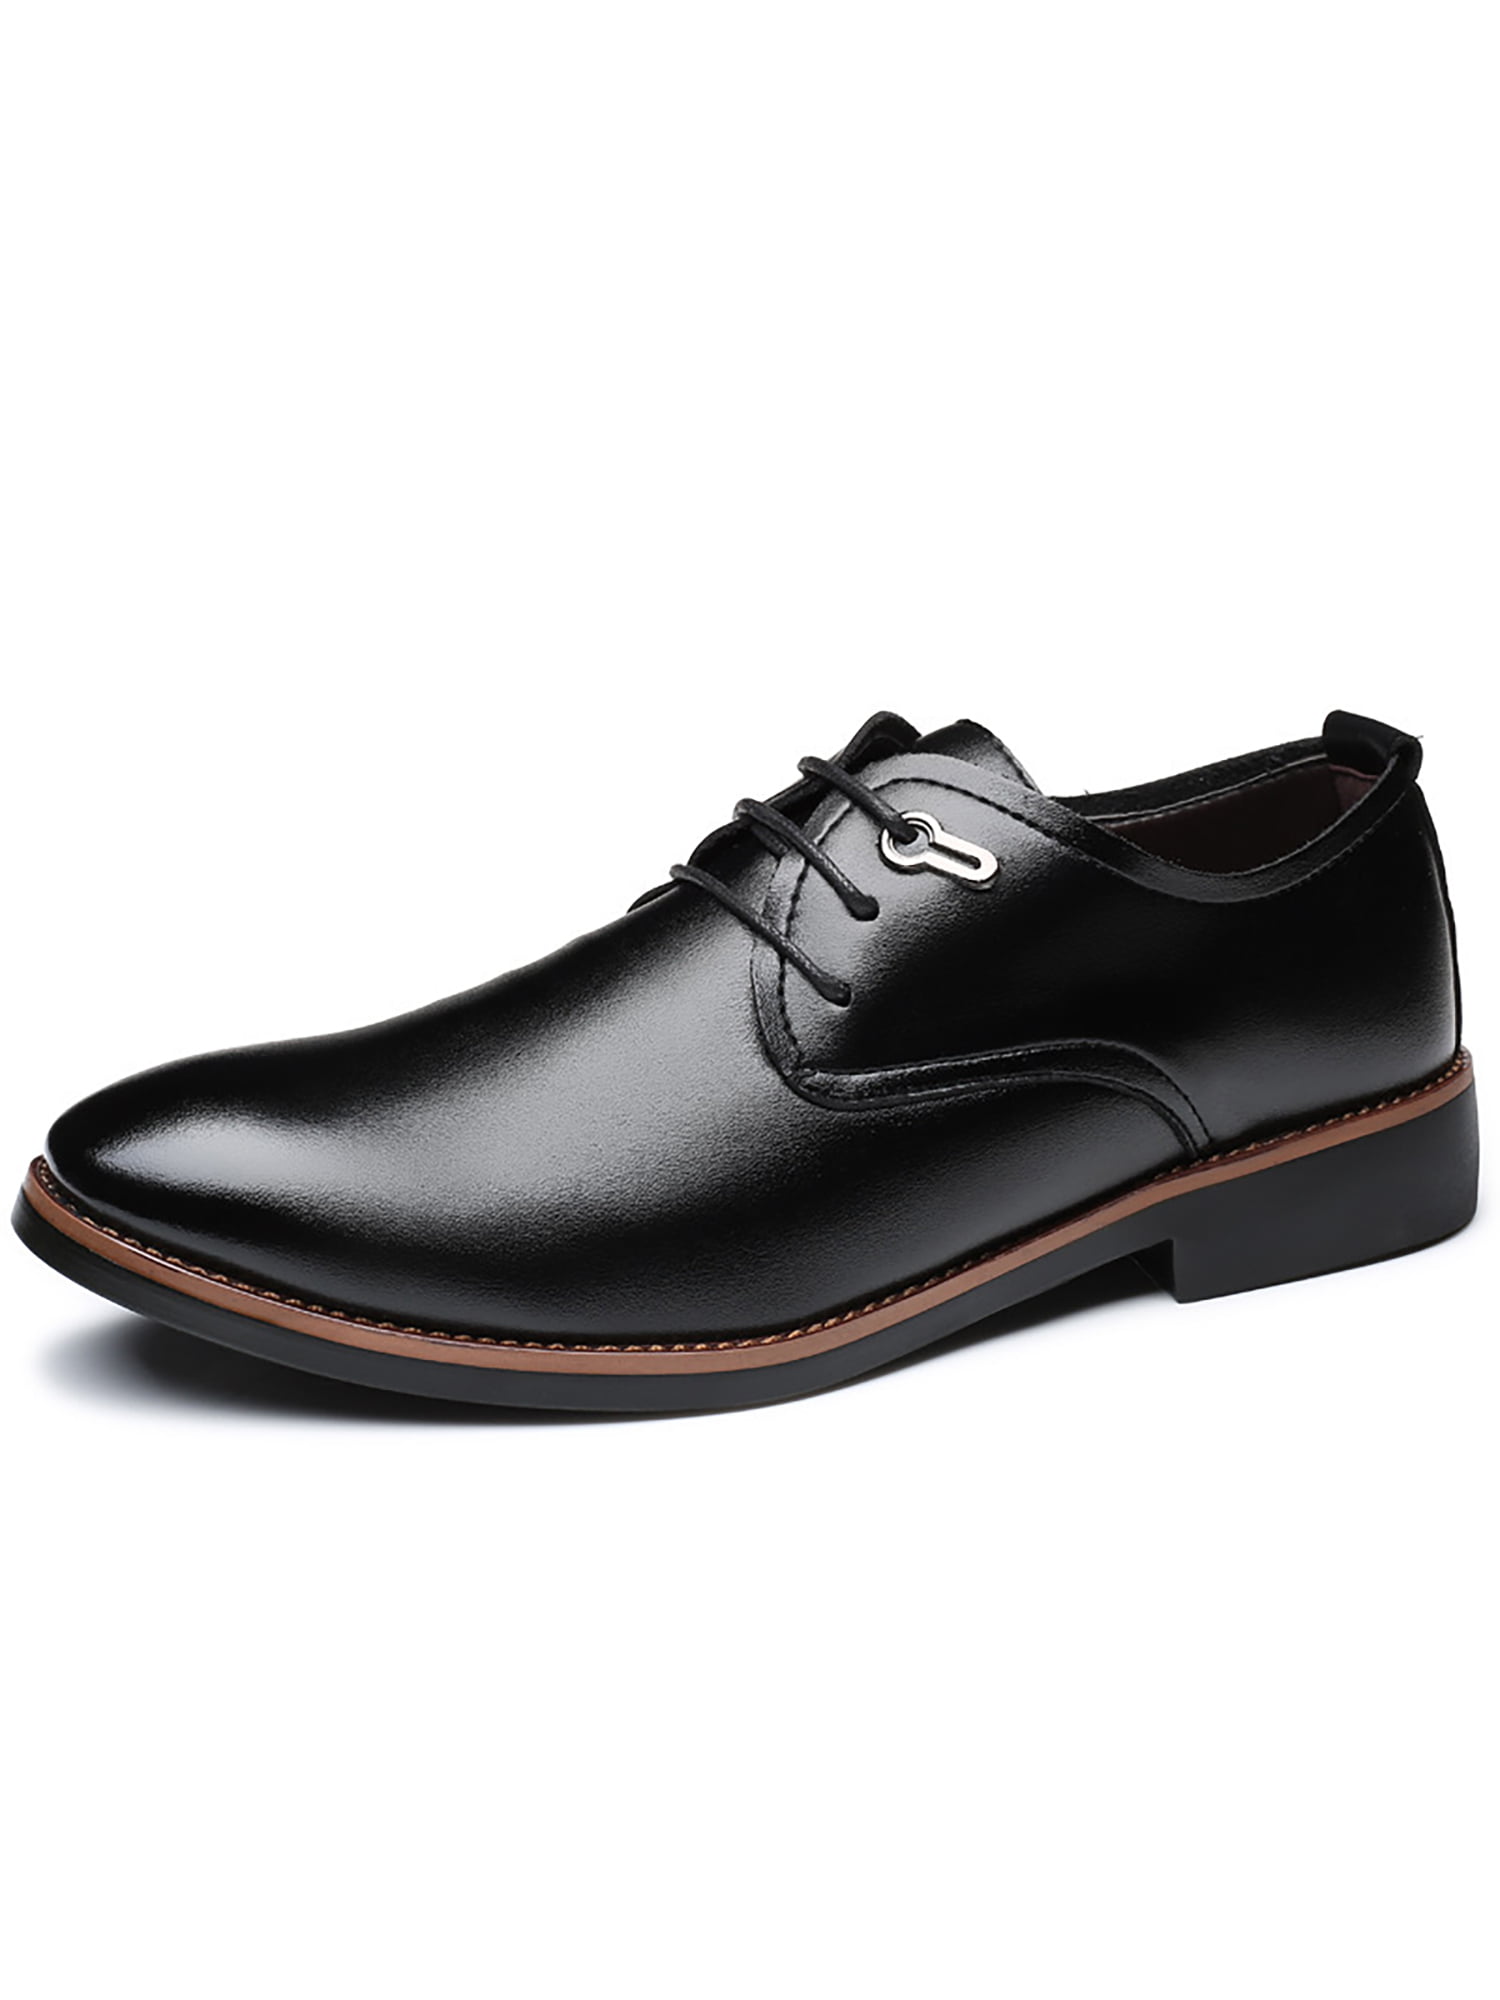 Leather Derby Mens Genuine Leather Formal Wedding Office Shoes Casual Shoes Flat Dress Shoes Classic Lace Up Footwear with Hand Stitched & Glued Soles